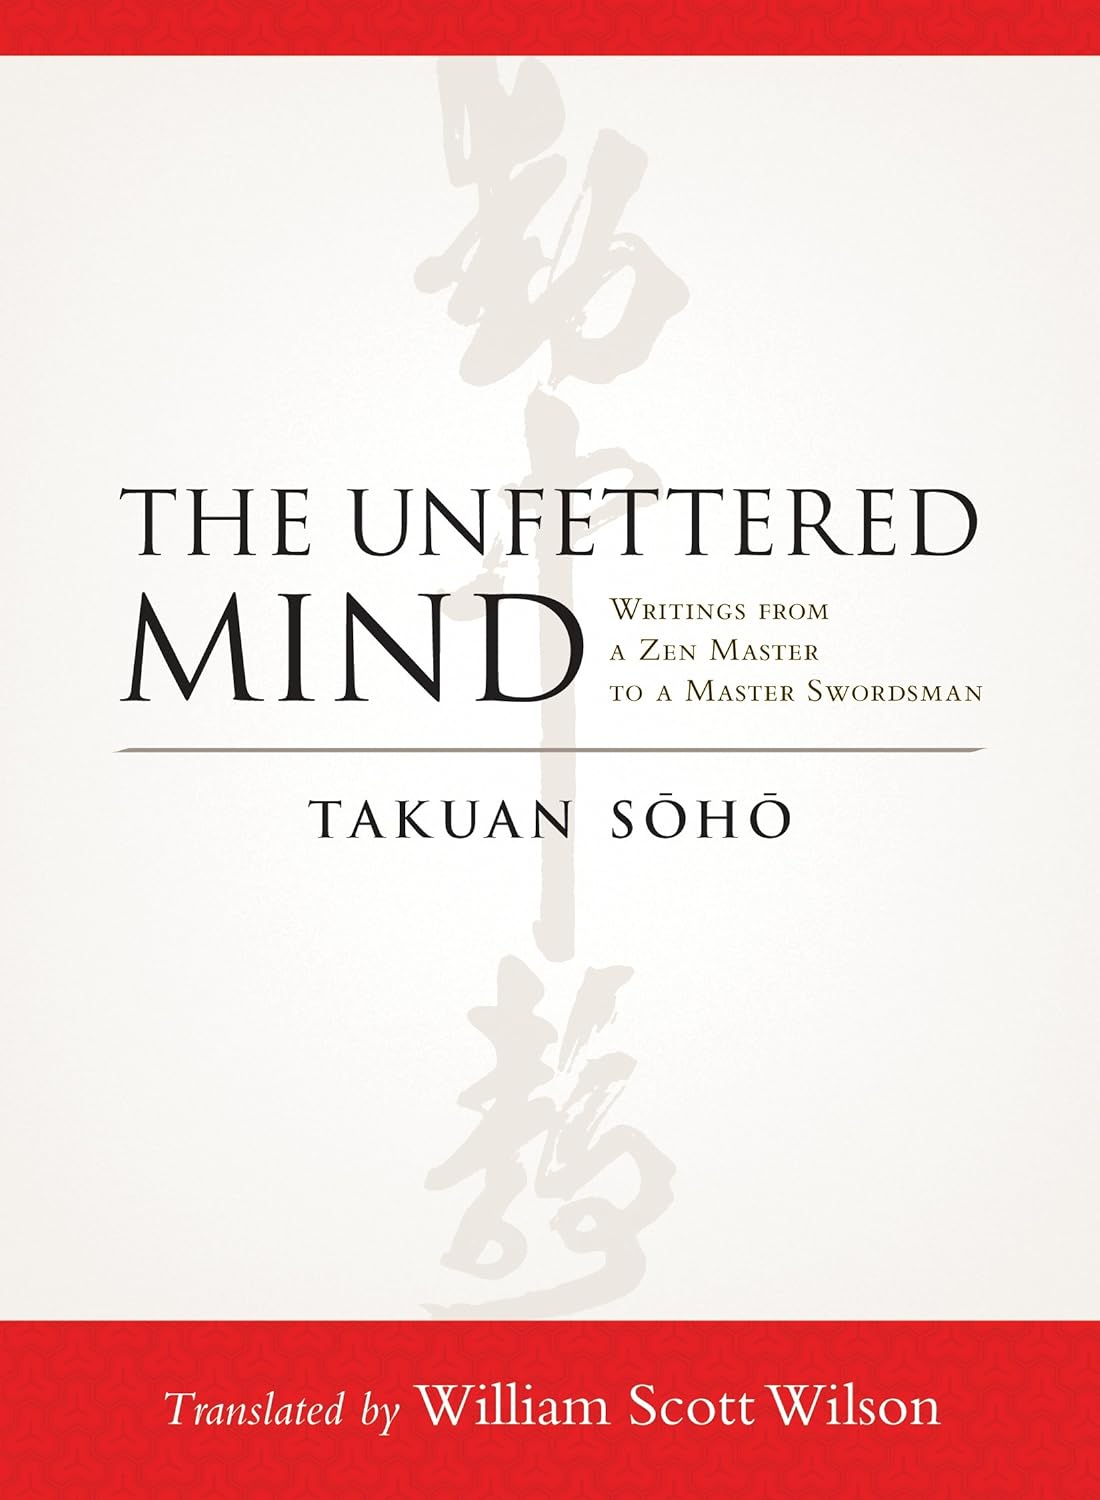 9781590309865 The Unfettered Mind: Writings from a Zen Master to a Master Swordsman ペーパーバック